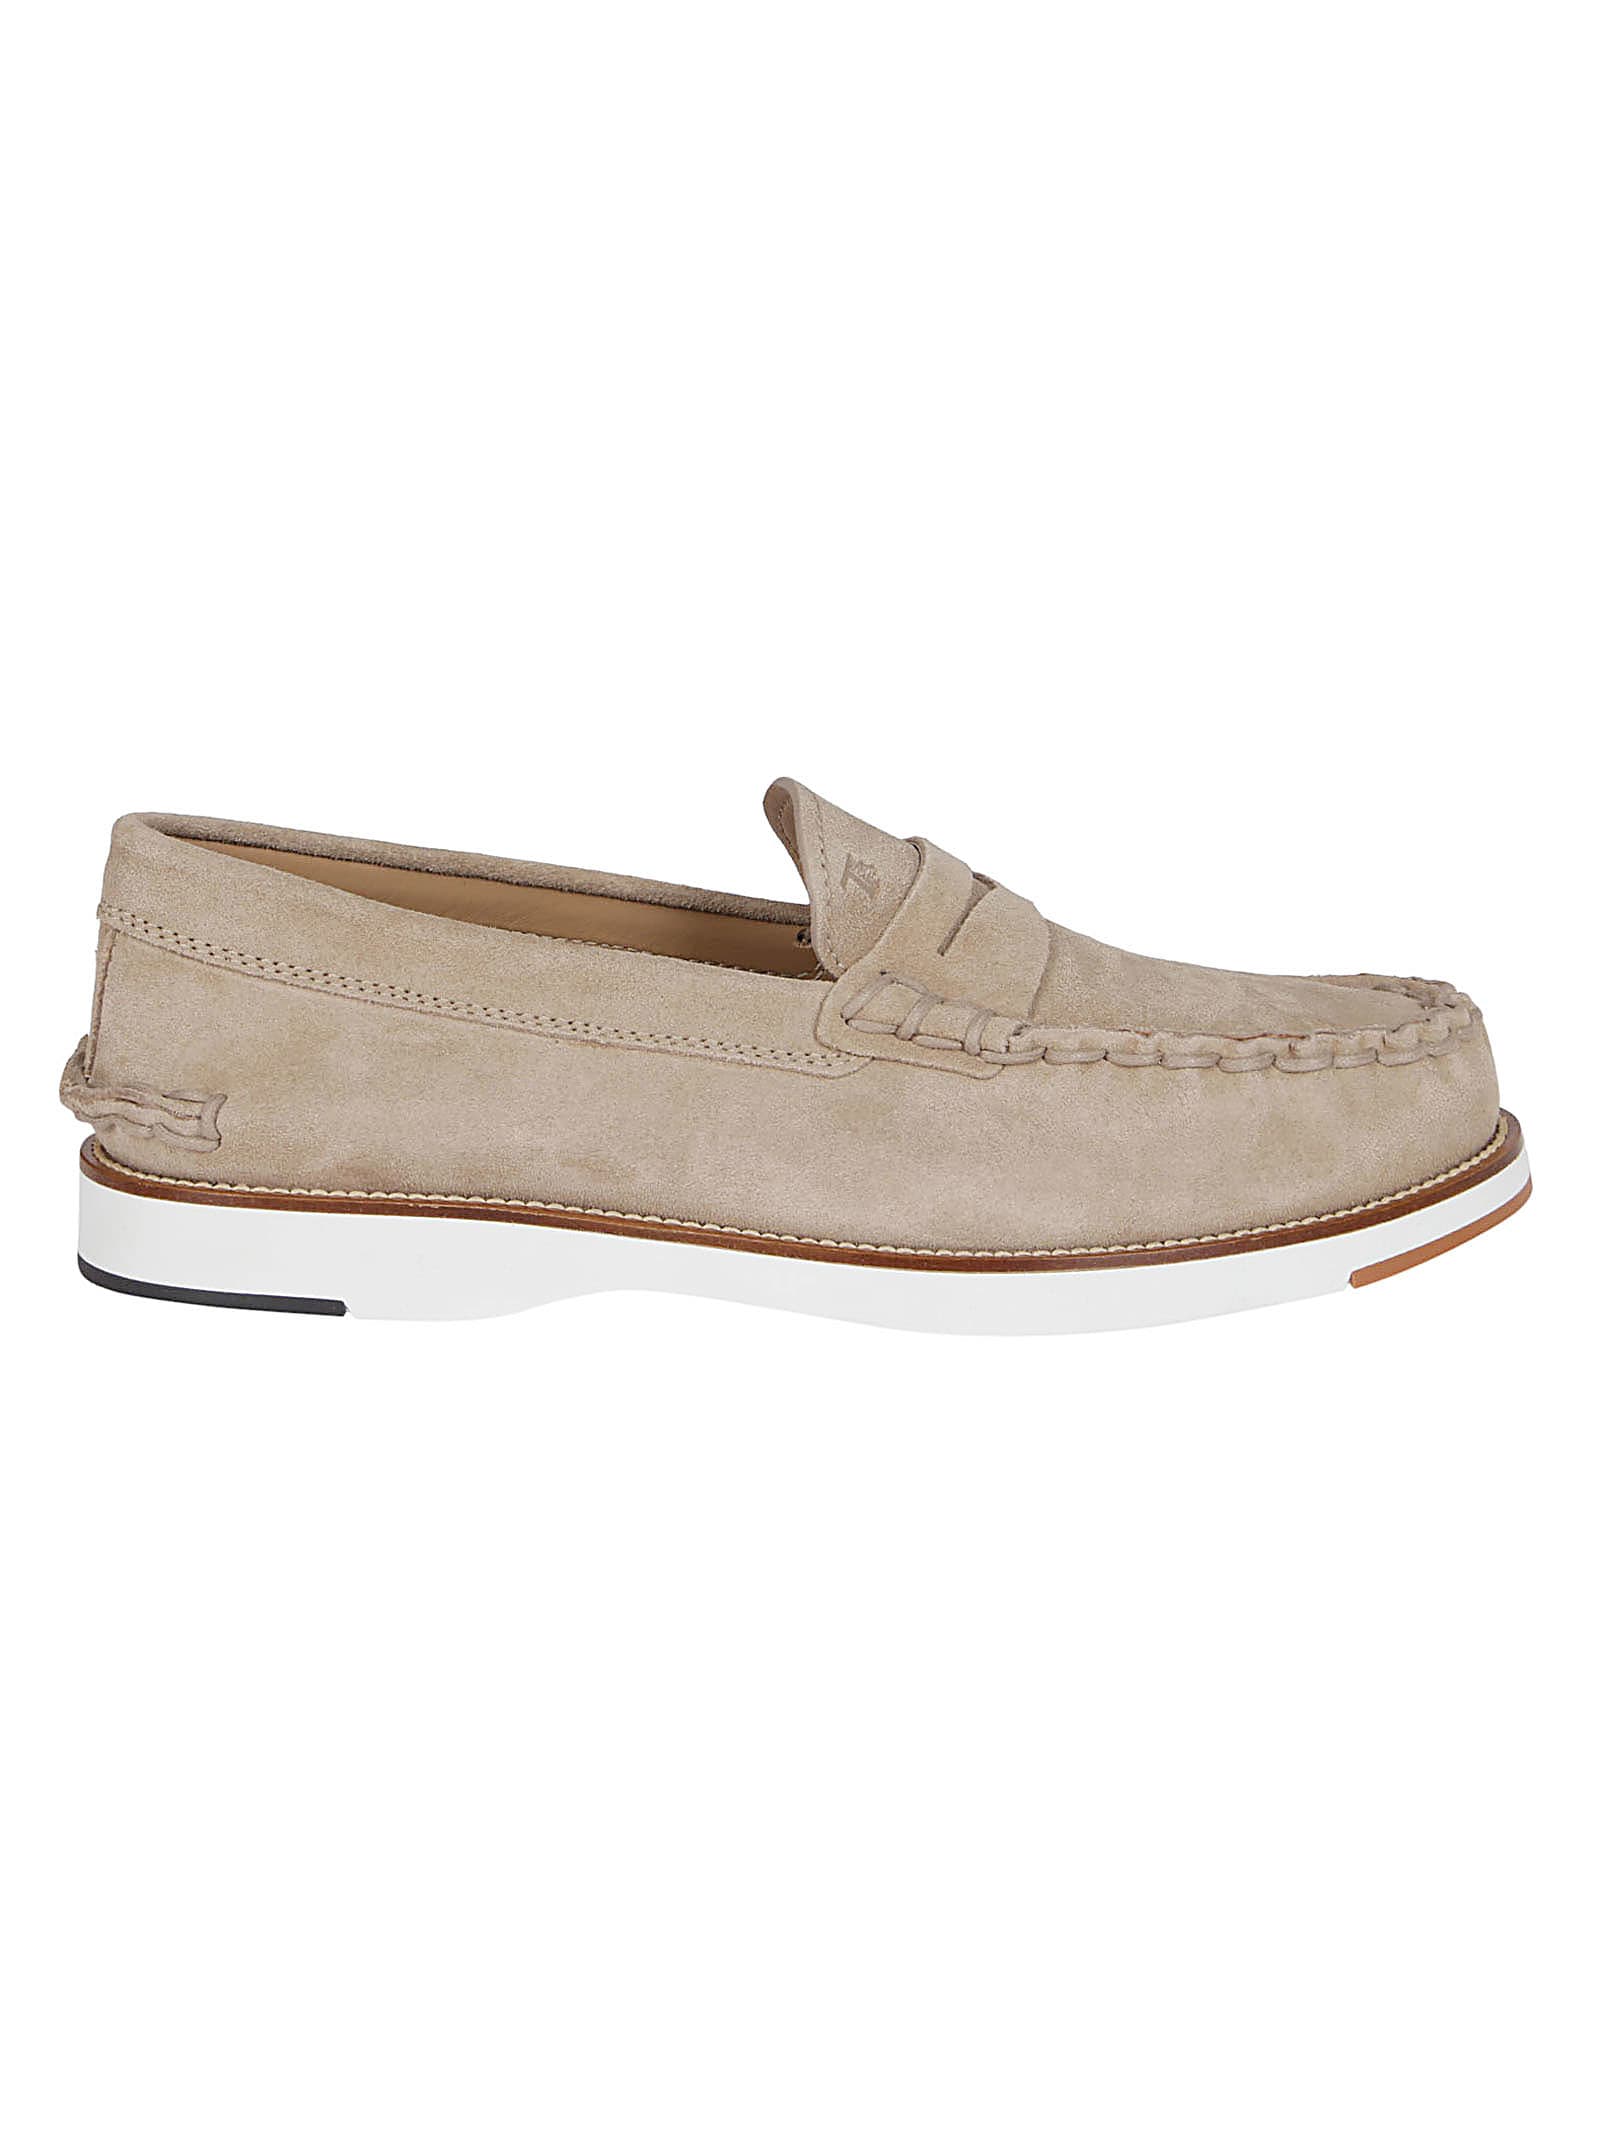 Tods Beige Suede Loafers